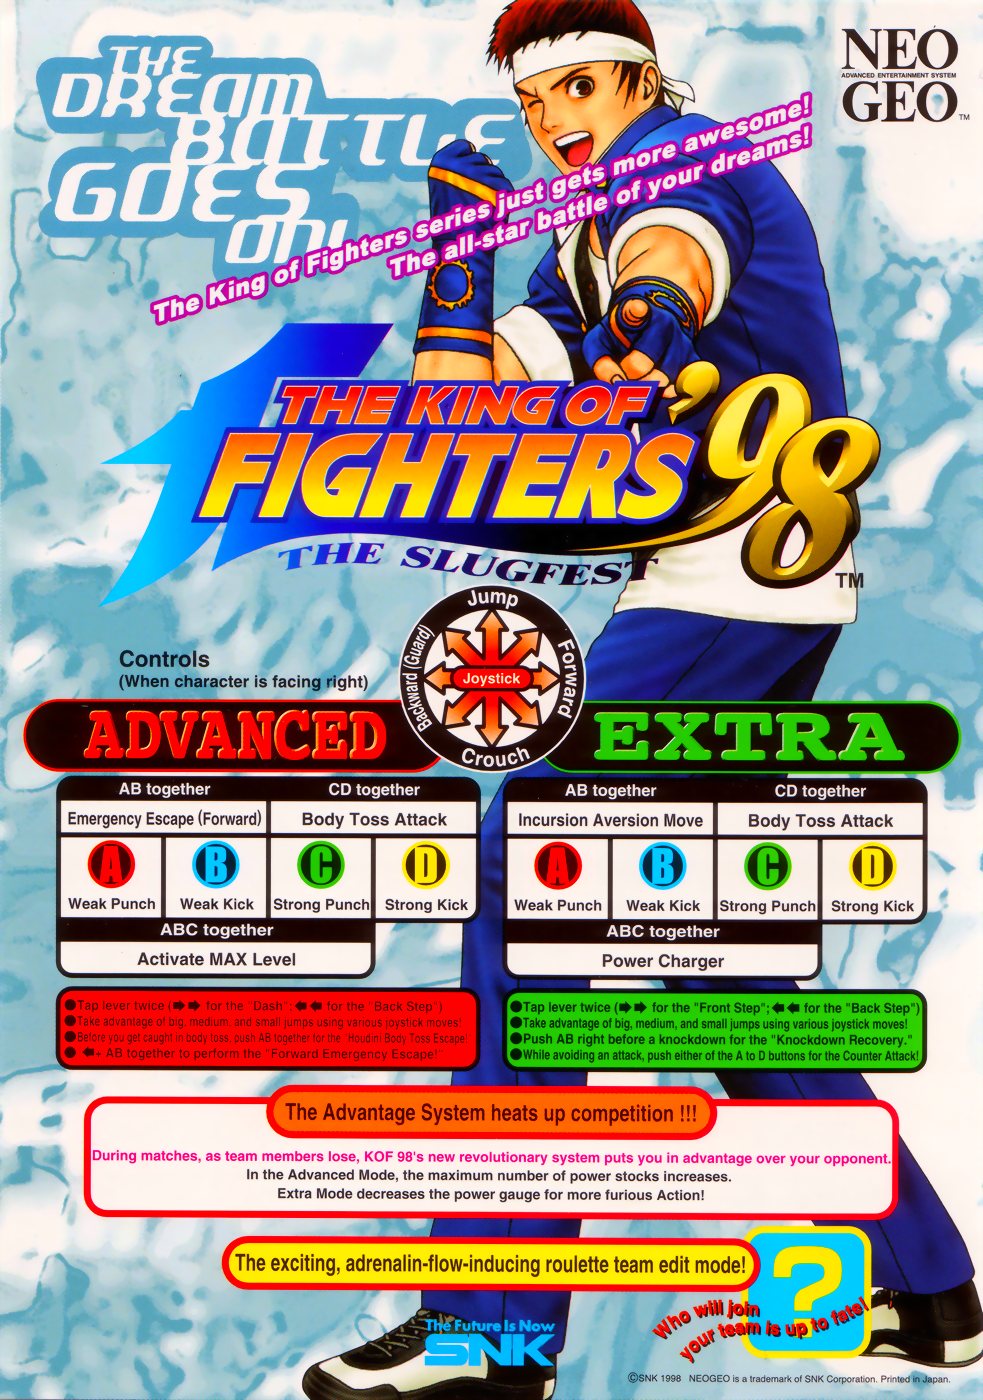 The King of Fighters '98 - The Slugfest / King of Fighters '98 - Dream Match Never Ends (Korean board, set 1) flyer